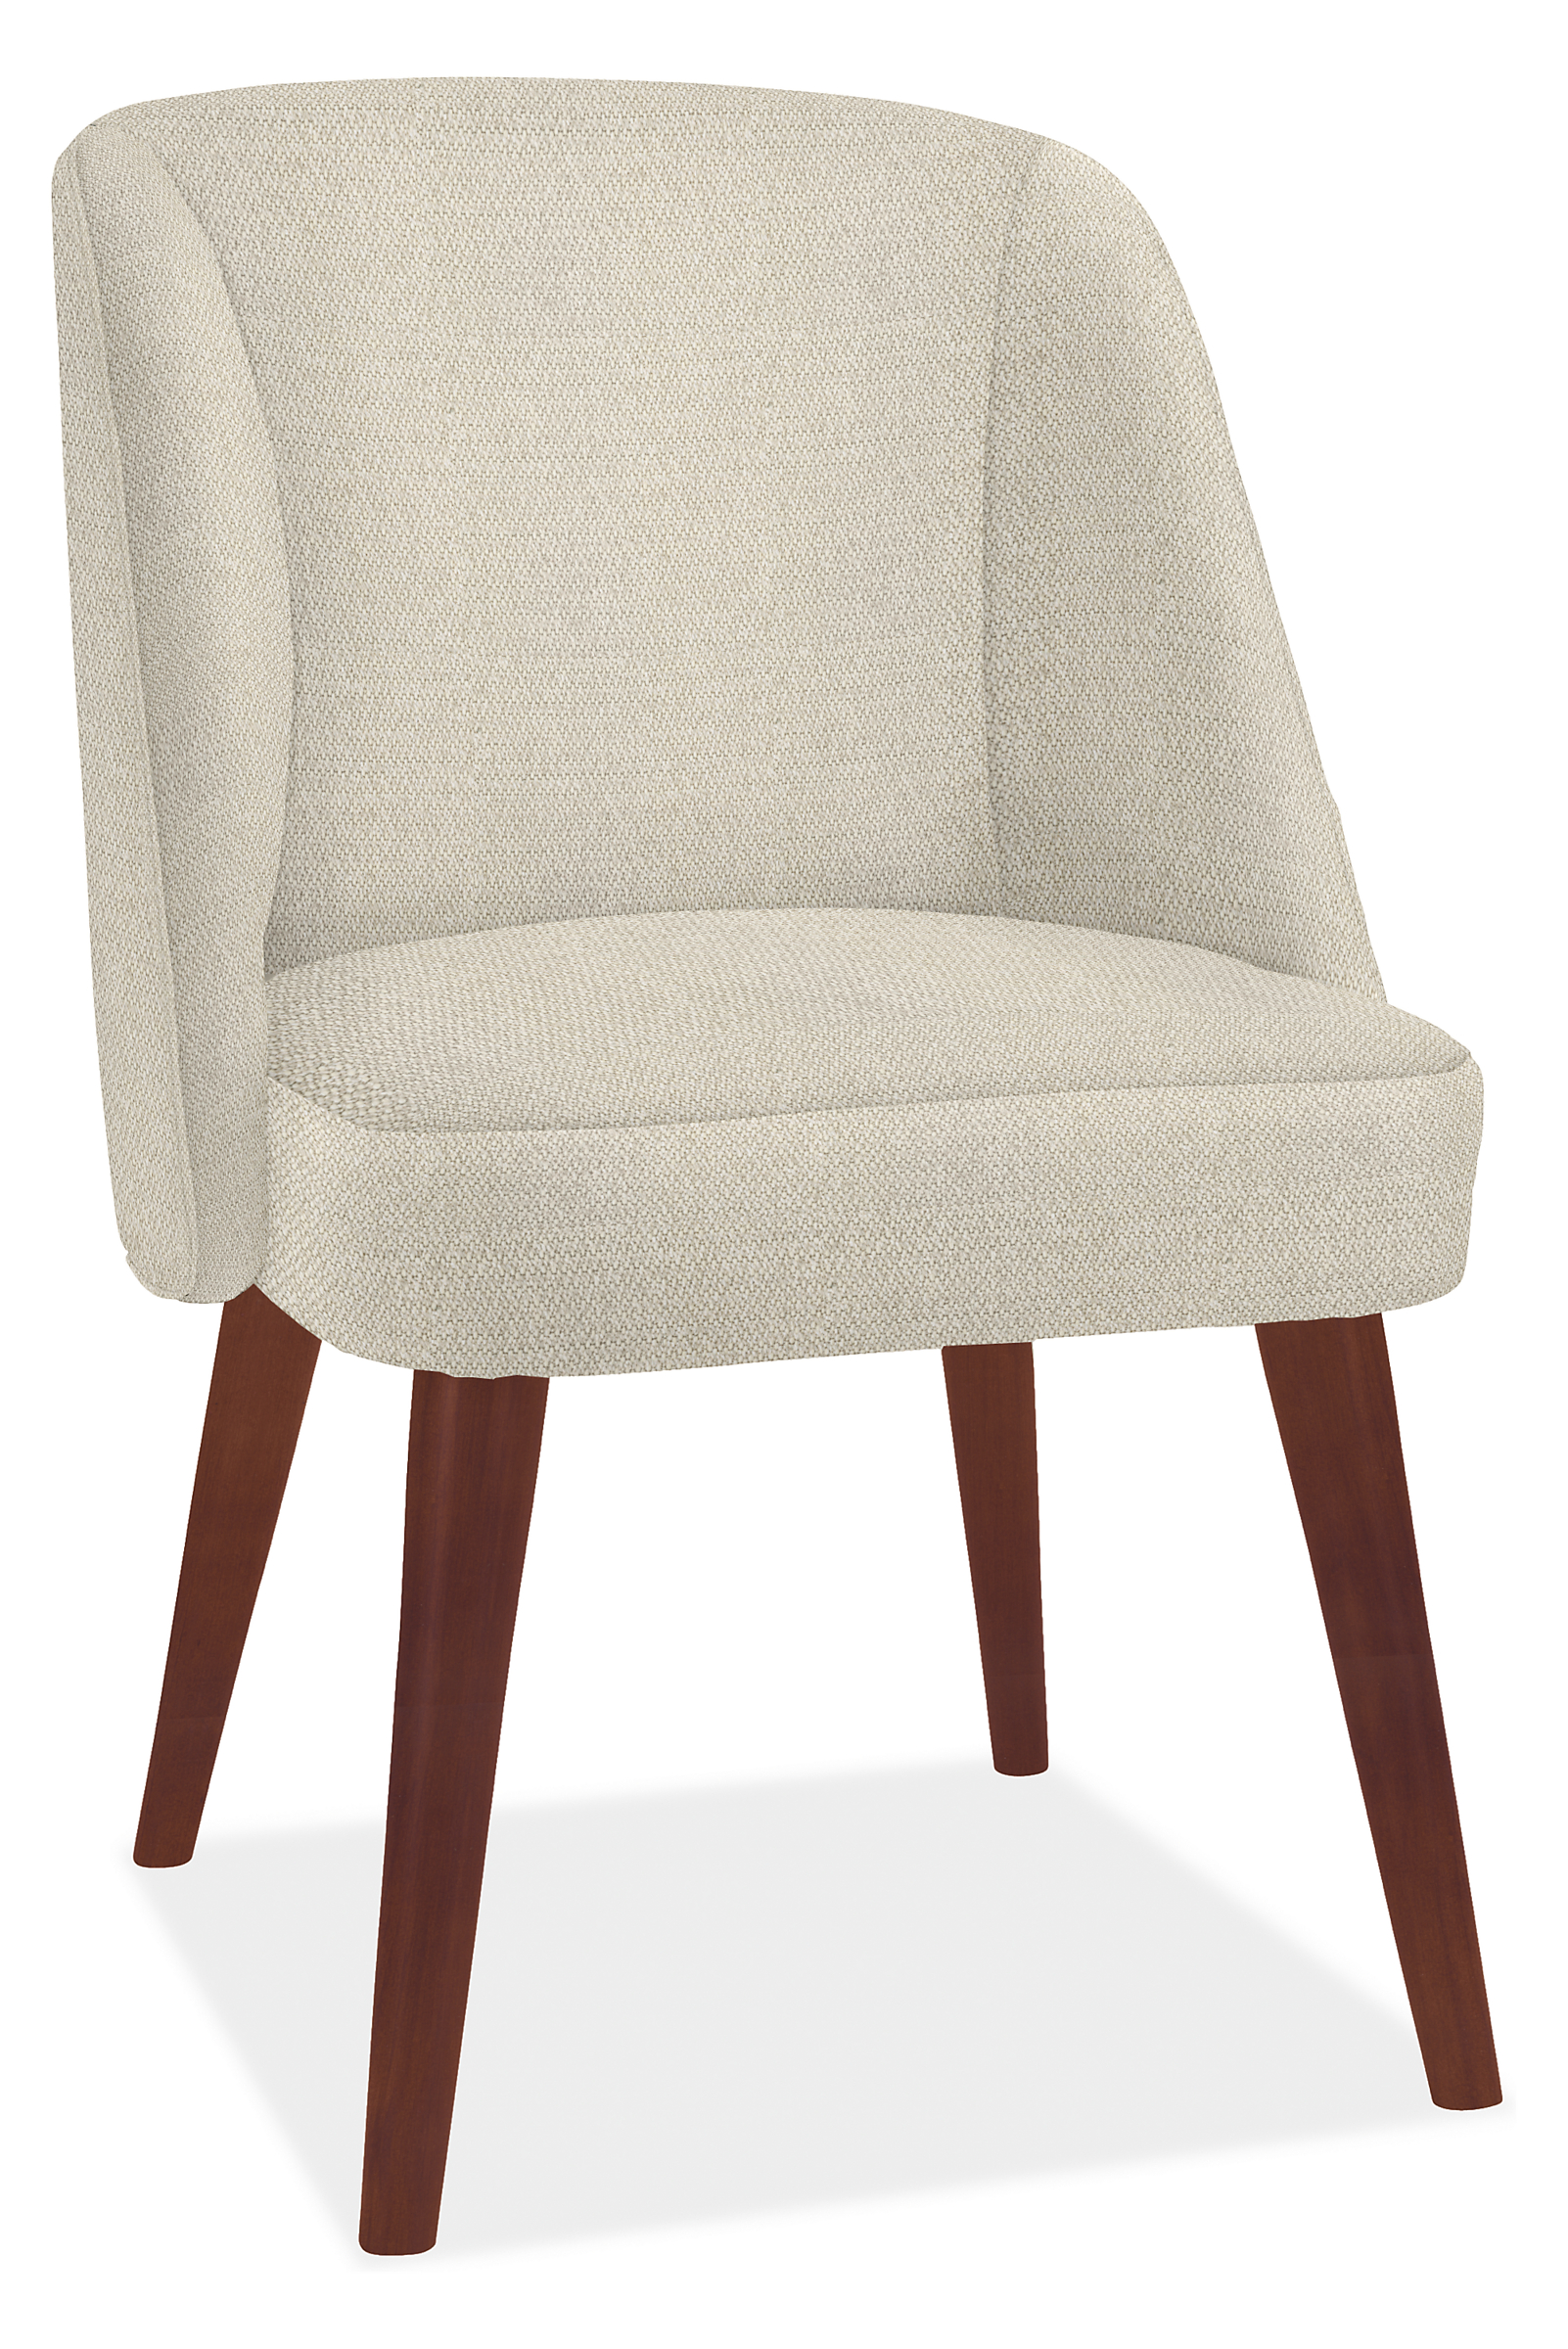 Cora Side Chair in Orla Ivory with Cognac Legs